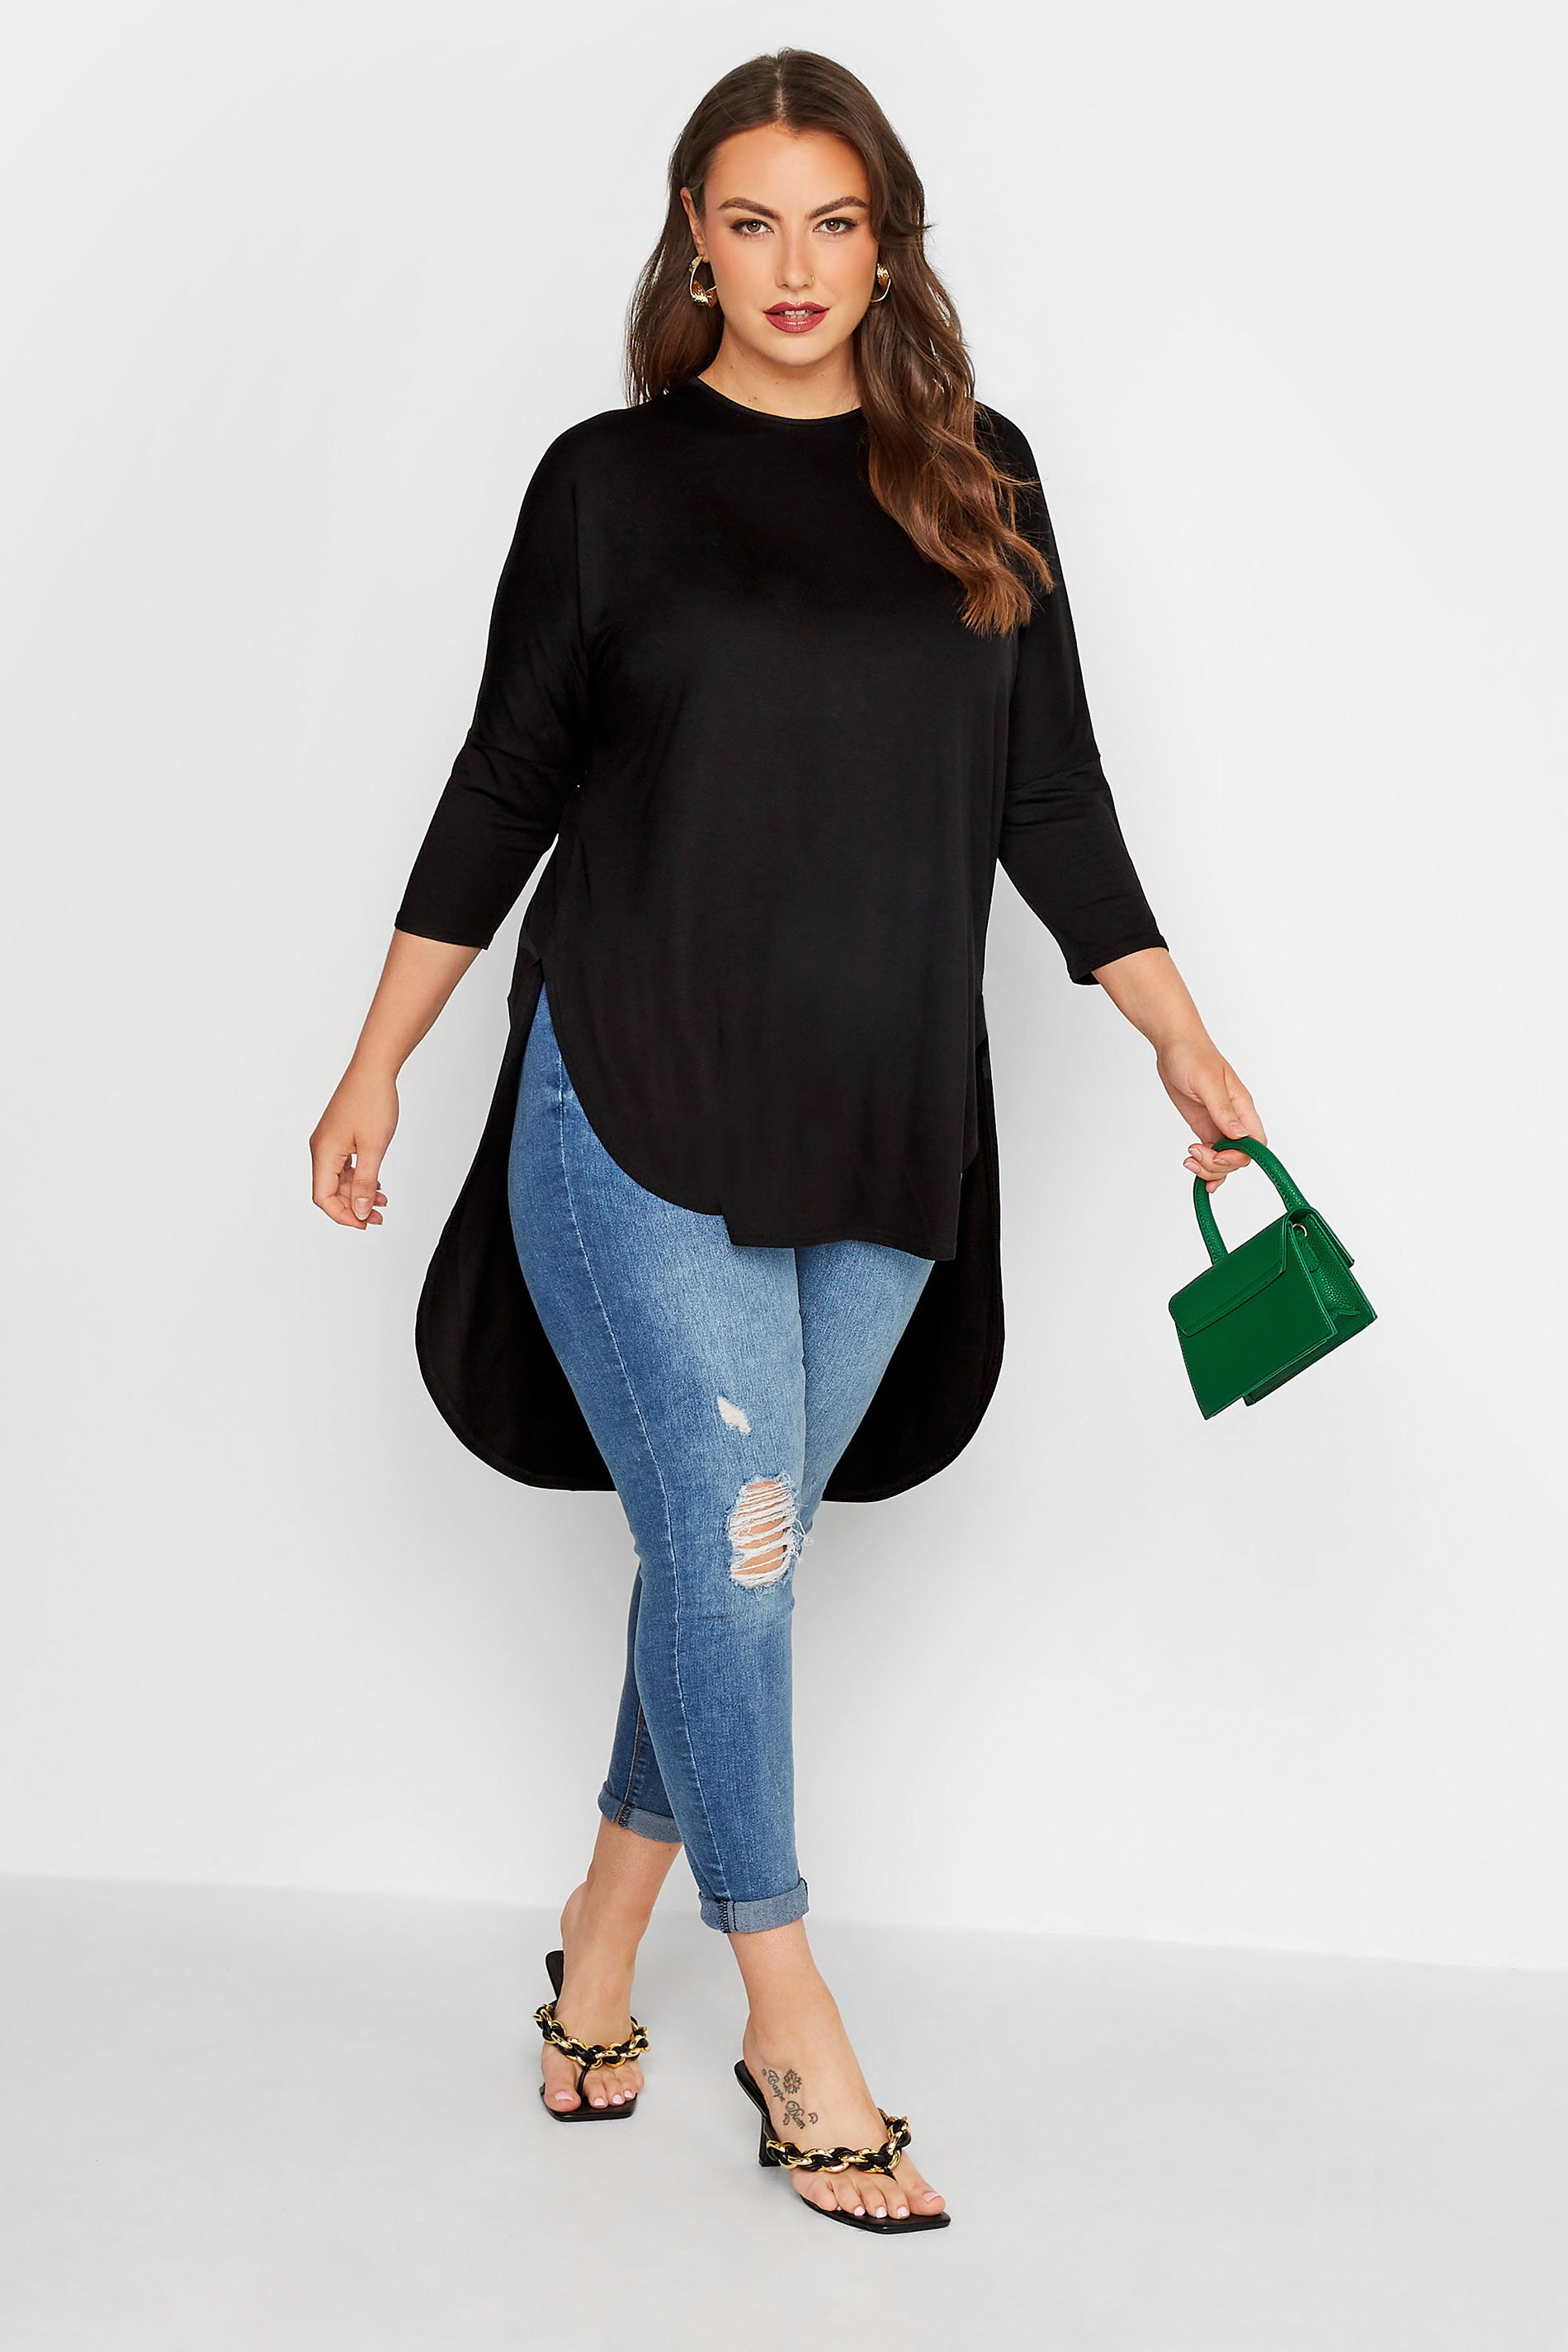 Grande taille  Tops Grande taille  Tops Ourlet Plongeant | LIMITED COLLECTION - T-Shirt Noir Manches Longues Ourlet Plongeant - JP77946